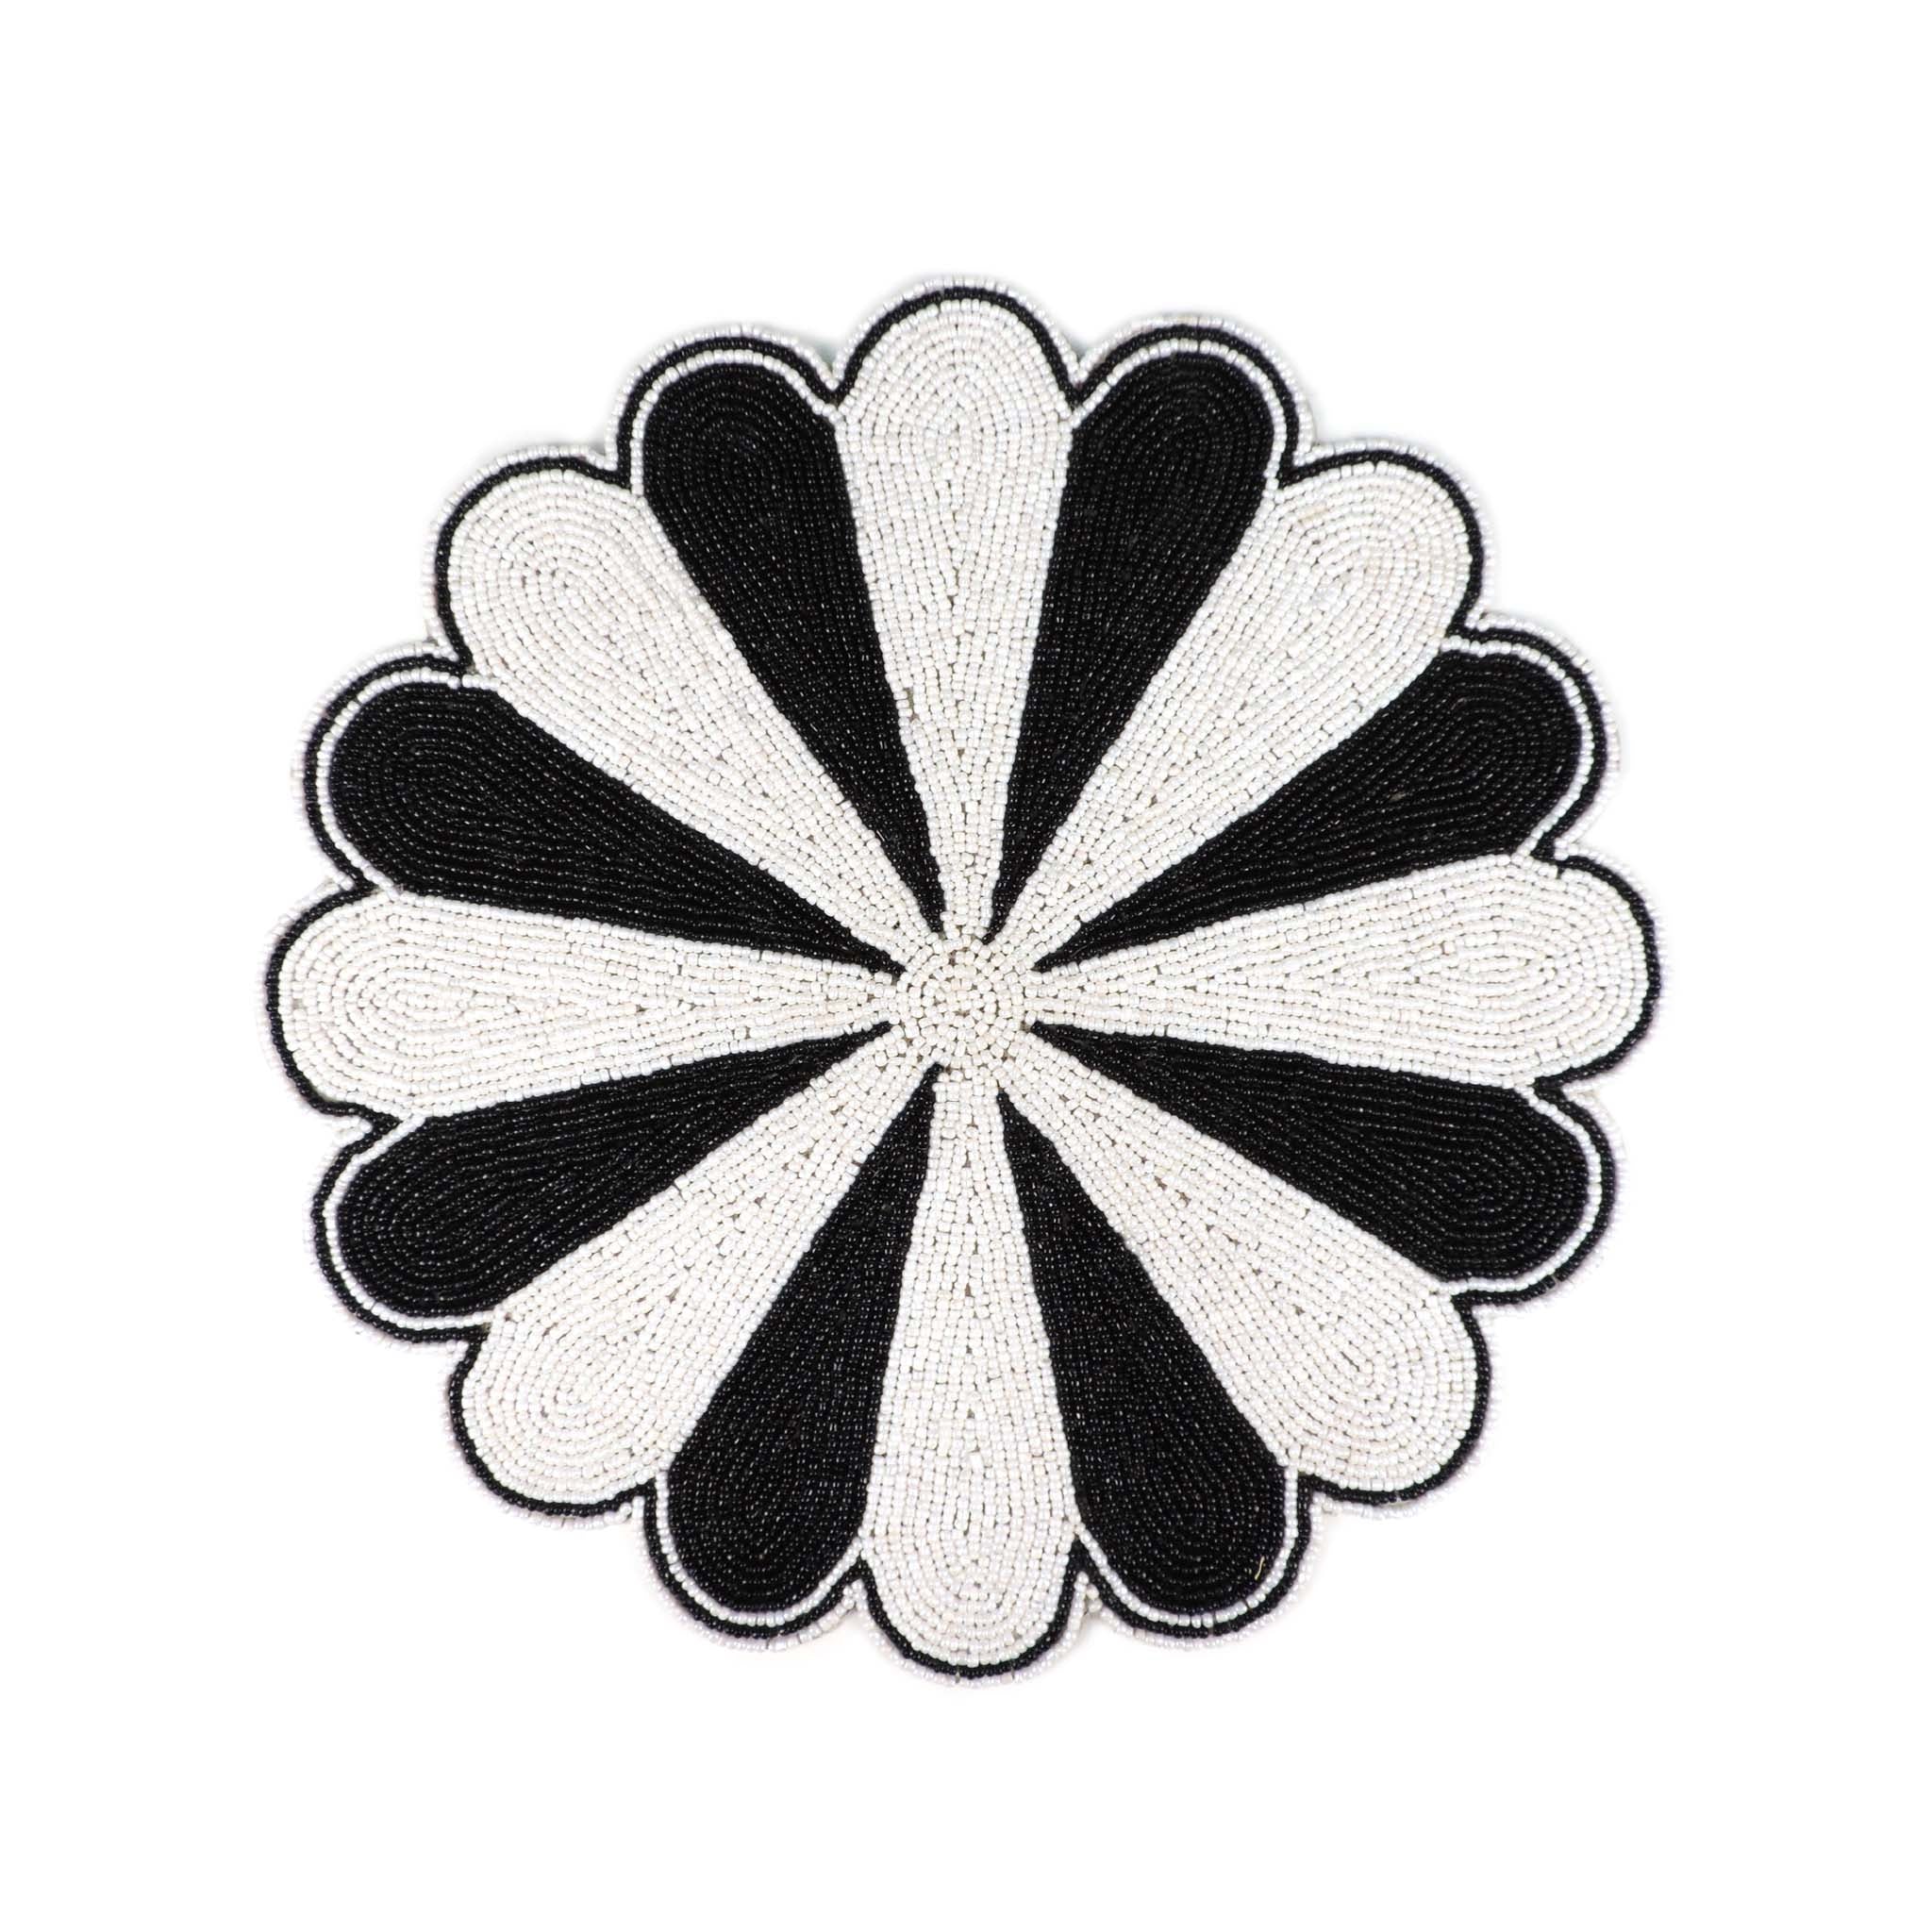 Big Top Bead Embroidered Placemat in Black & White, Set of 2